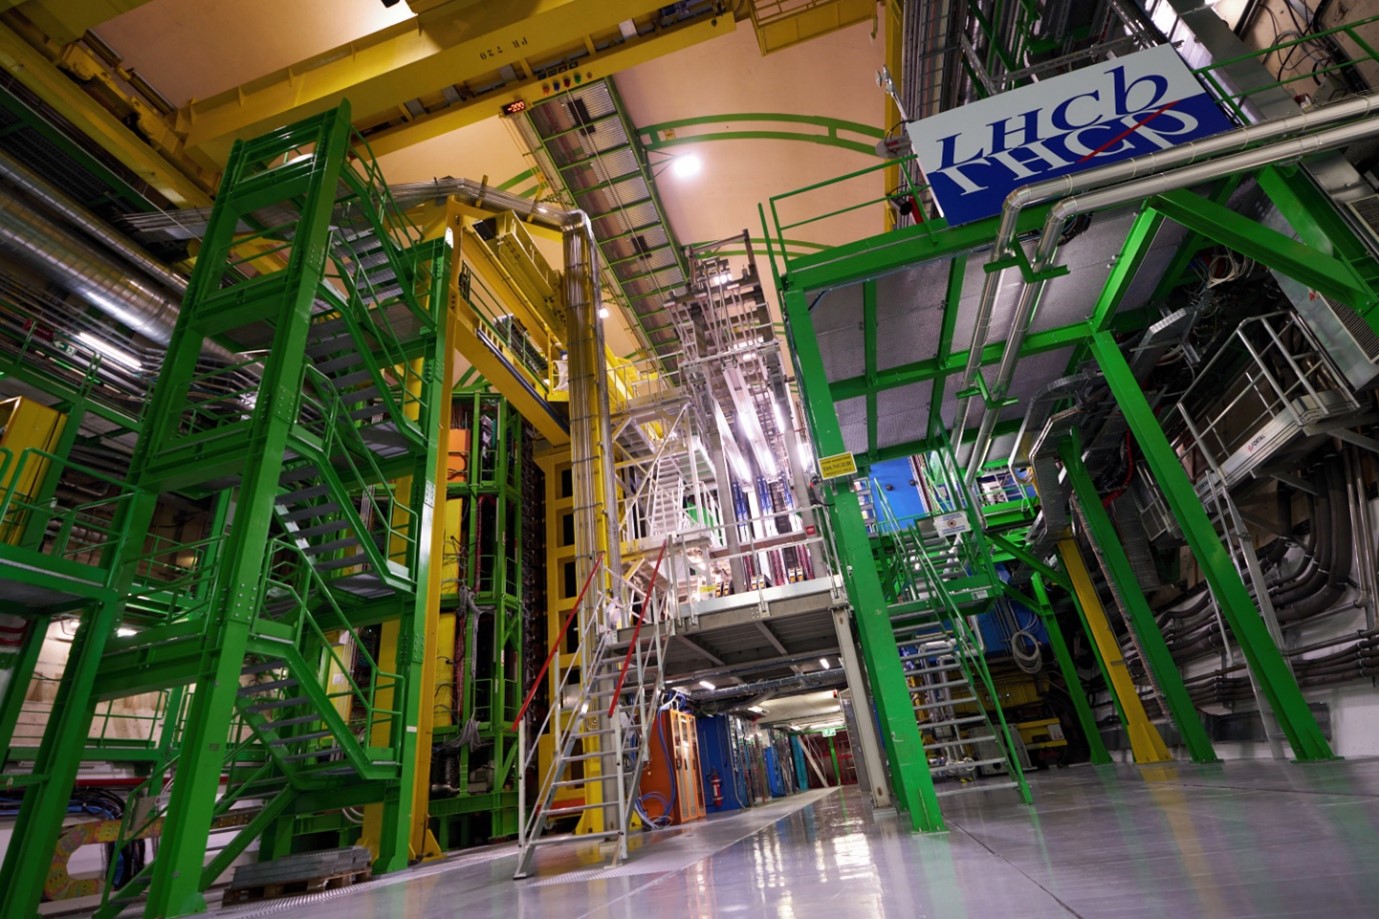 A photograph of the LHCb detector